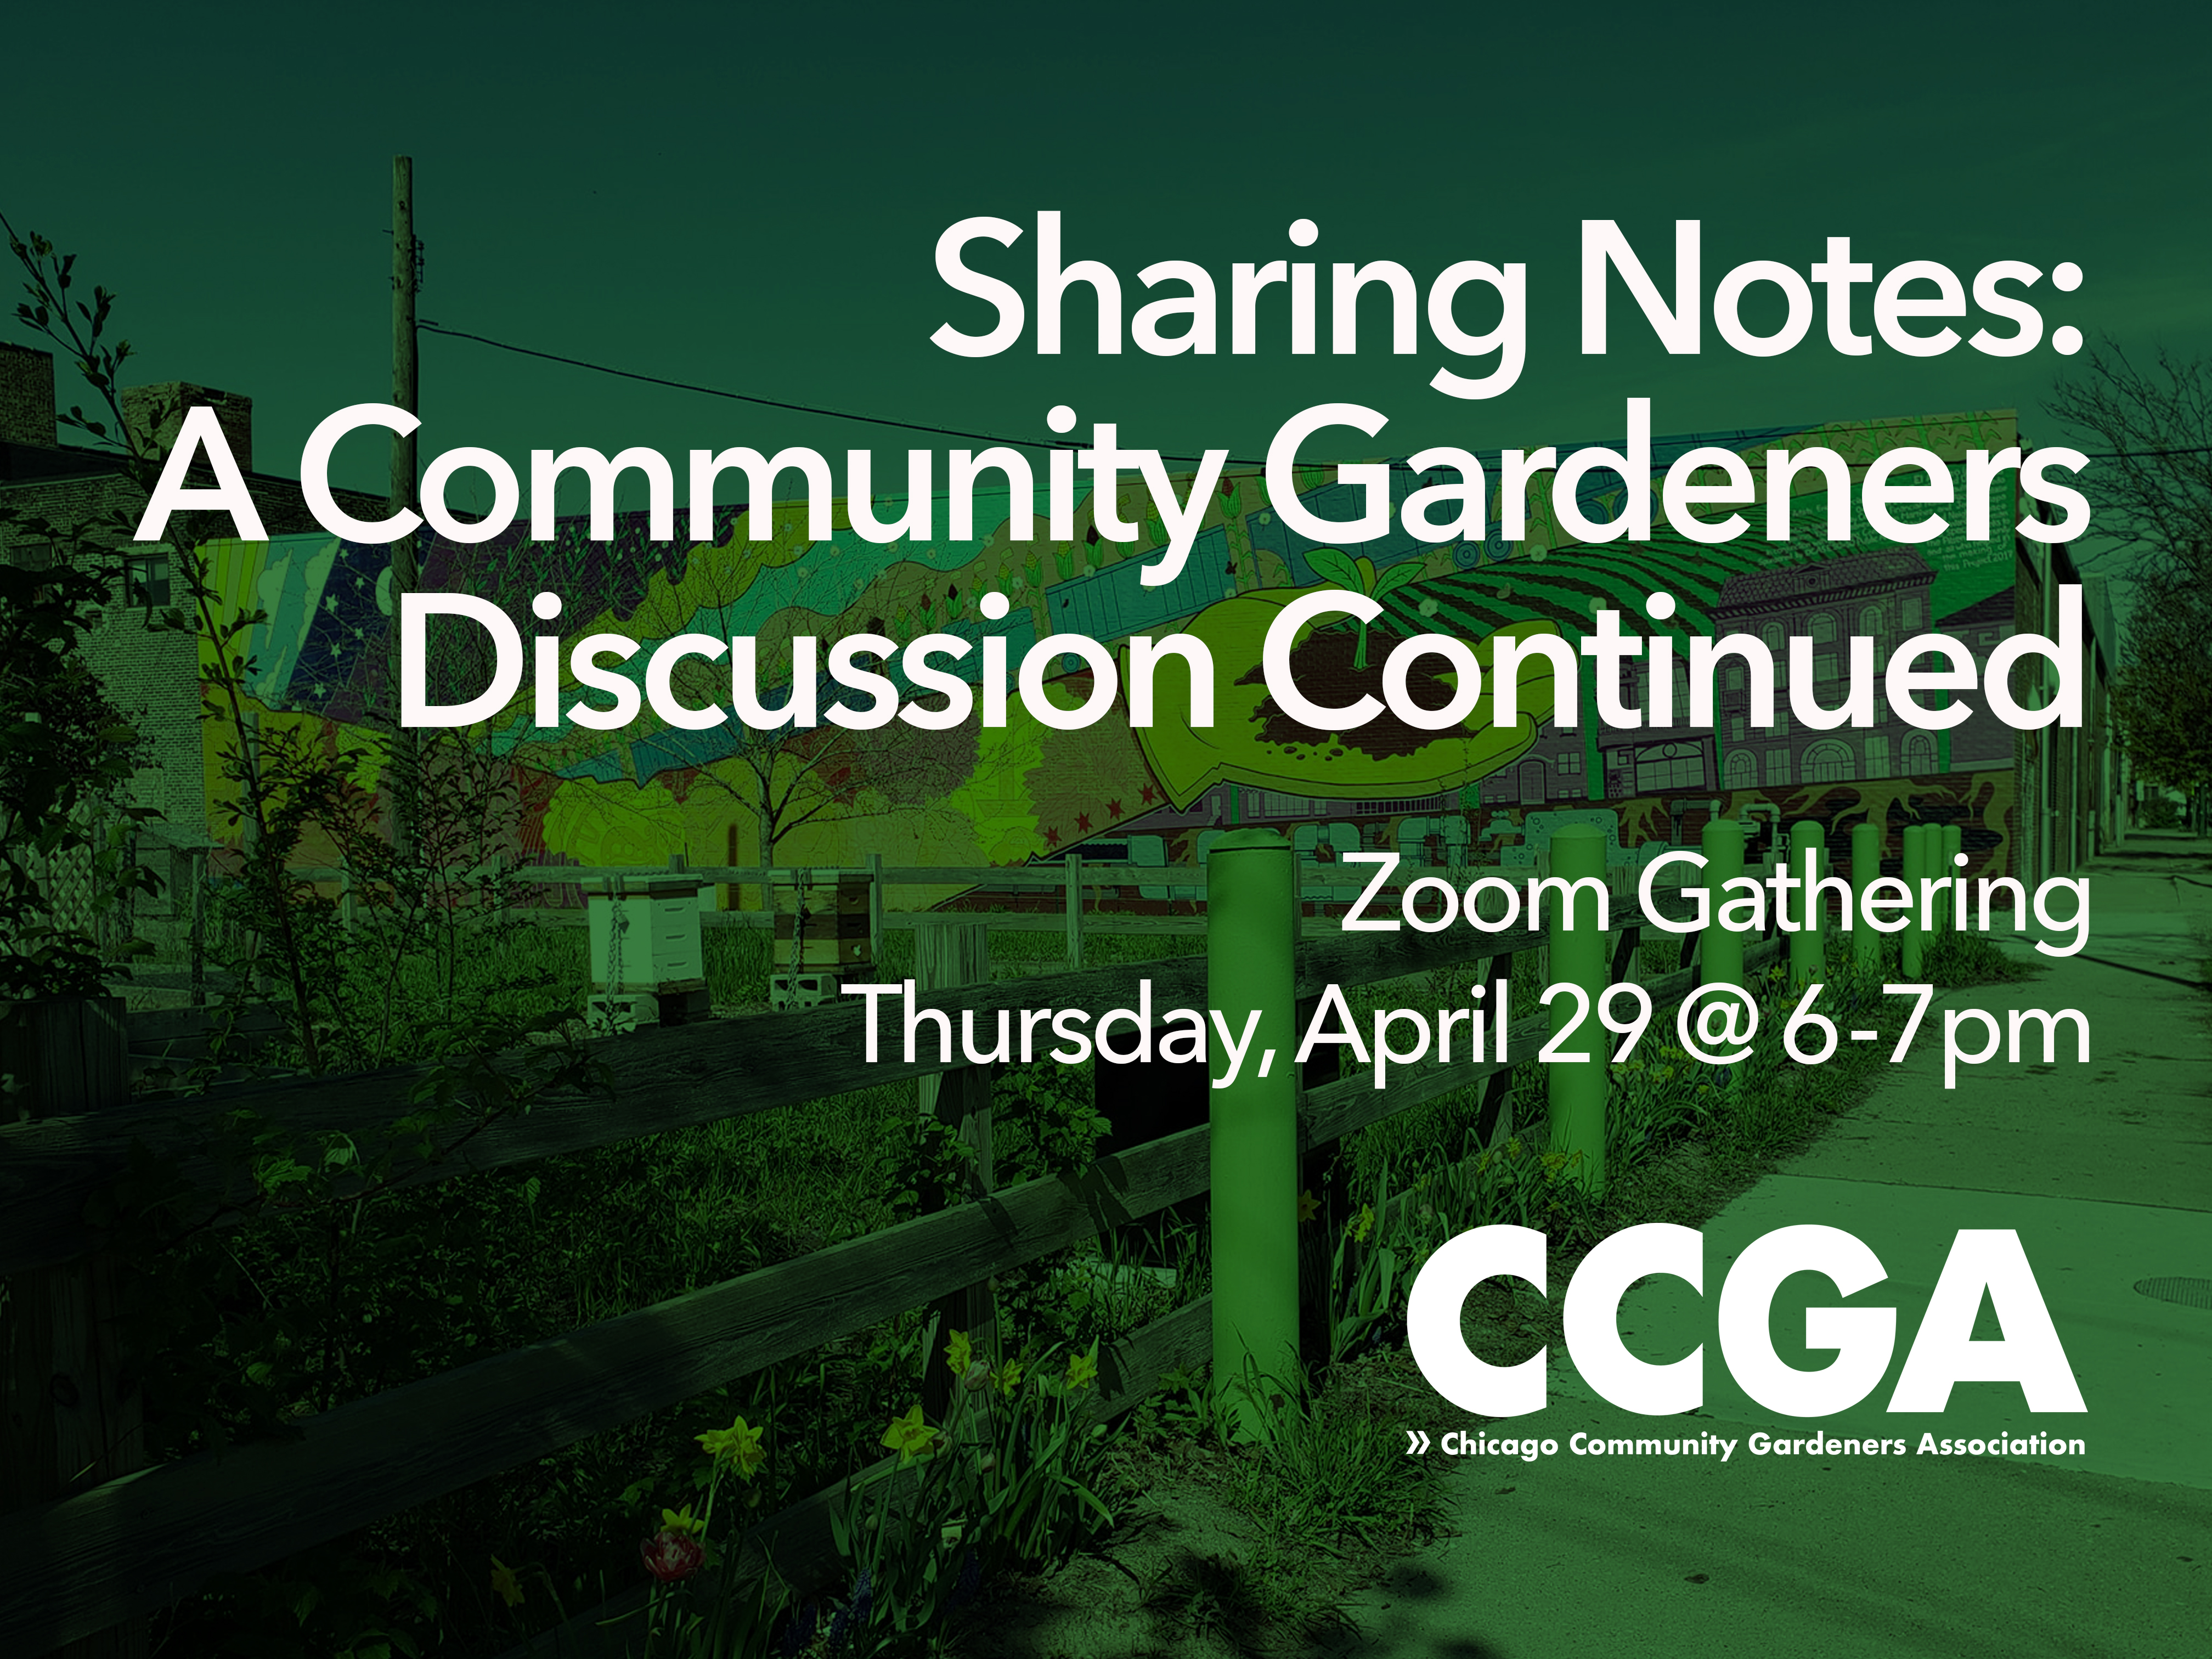 Join us on April 29 at 6pm for Sharing Notes: A Continued Community Gardeners Discussion